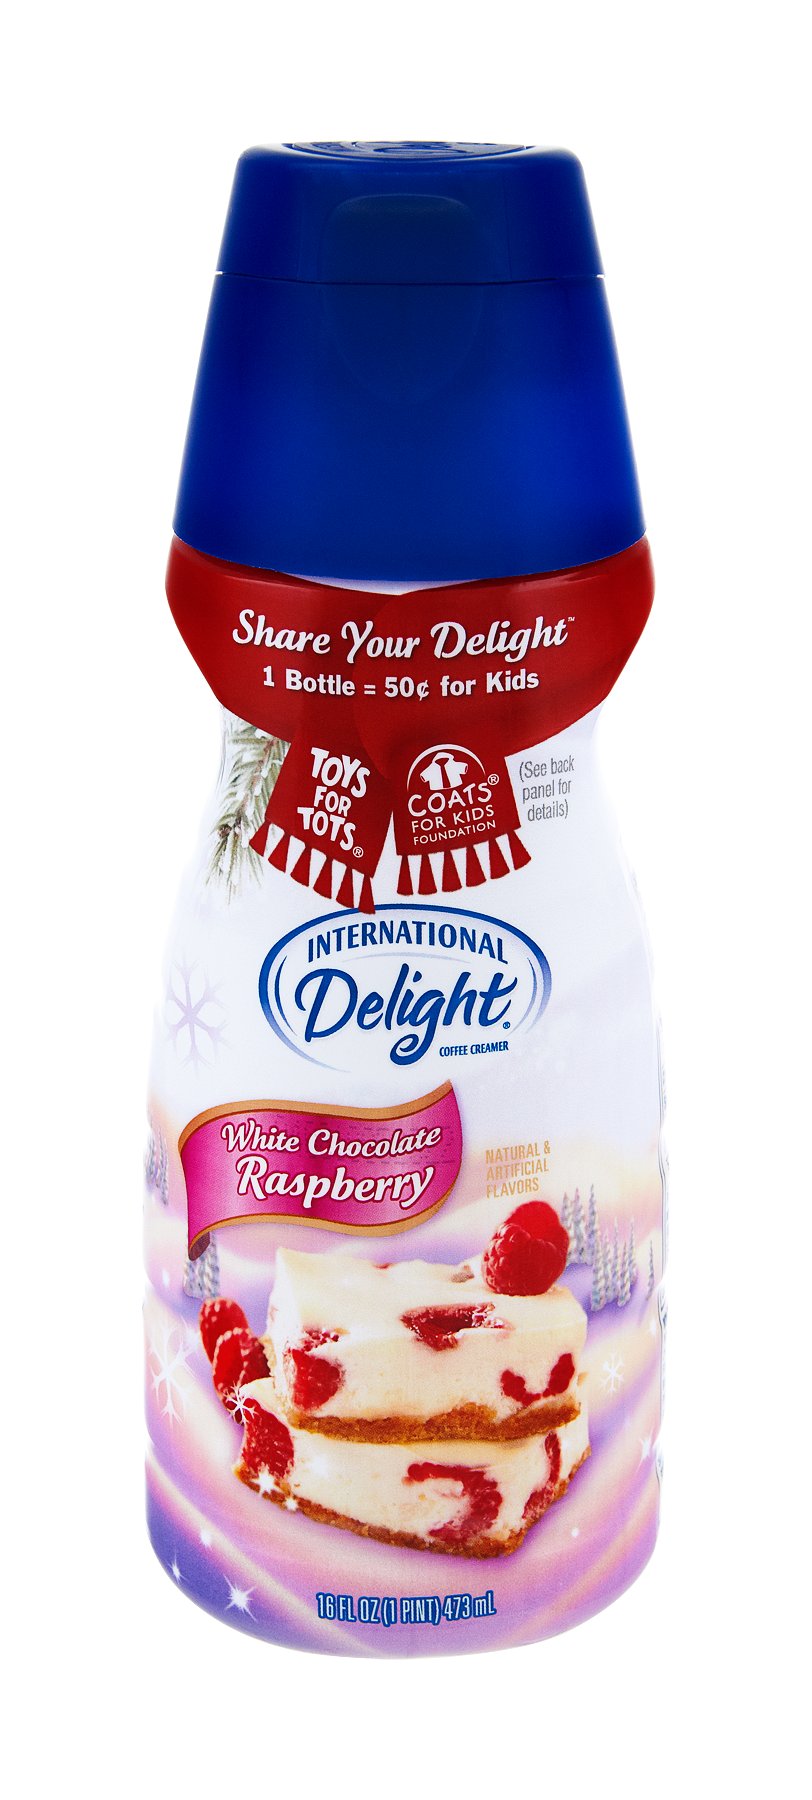 Share Your Delight